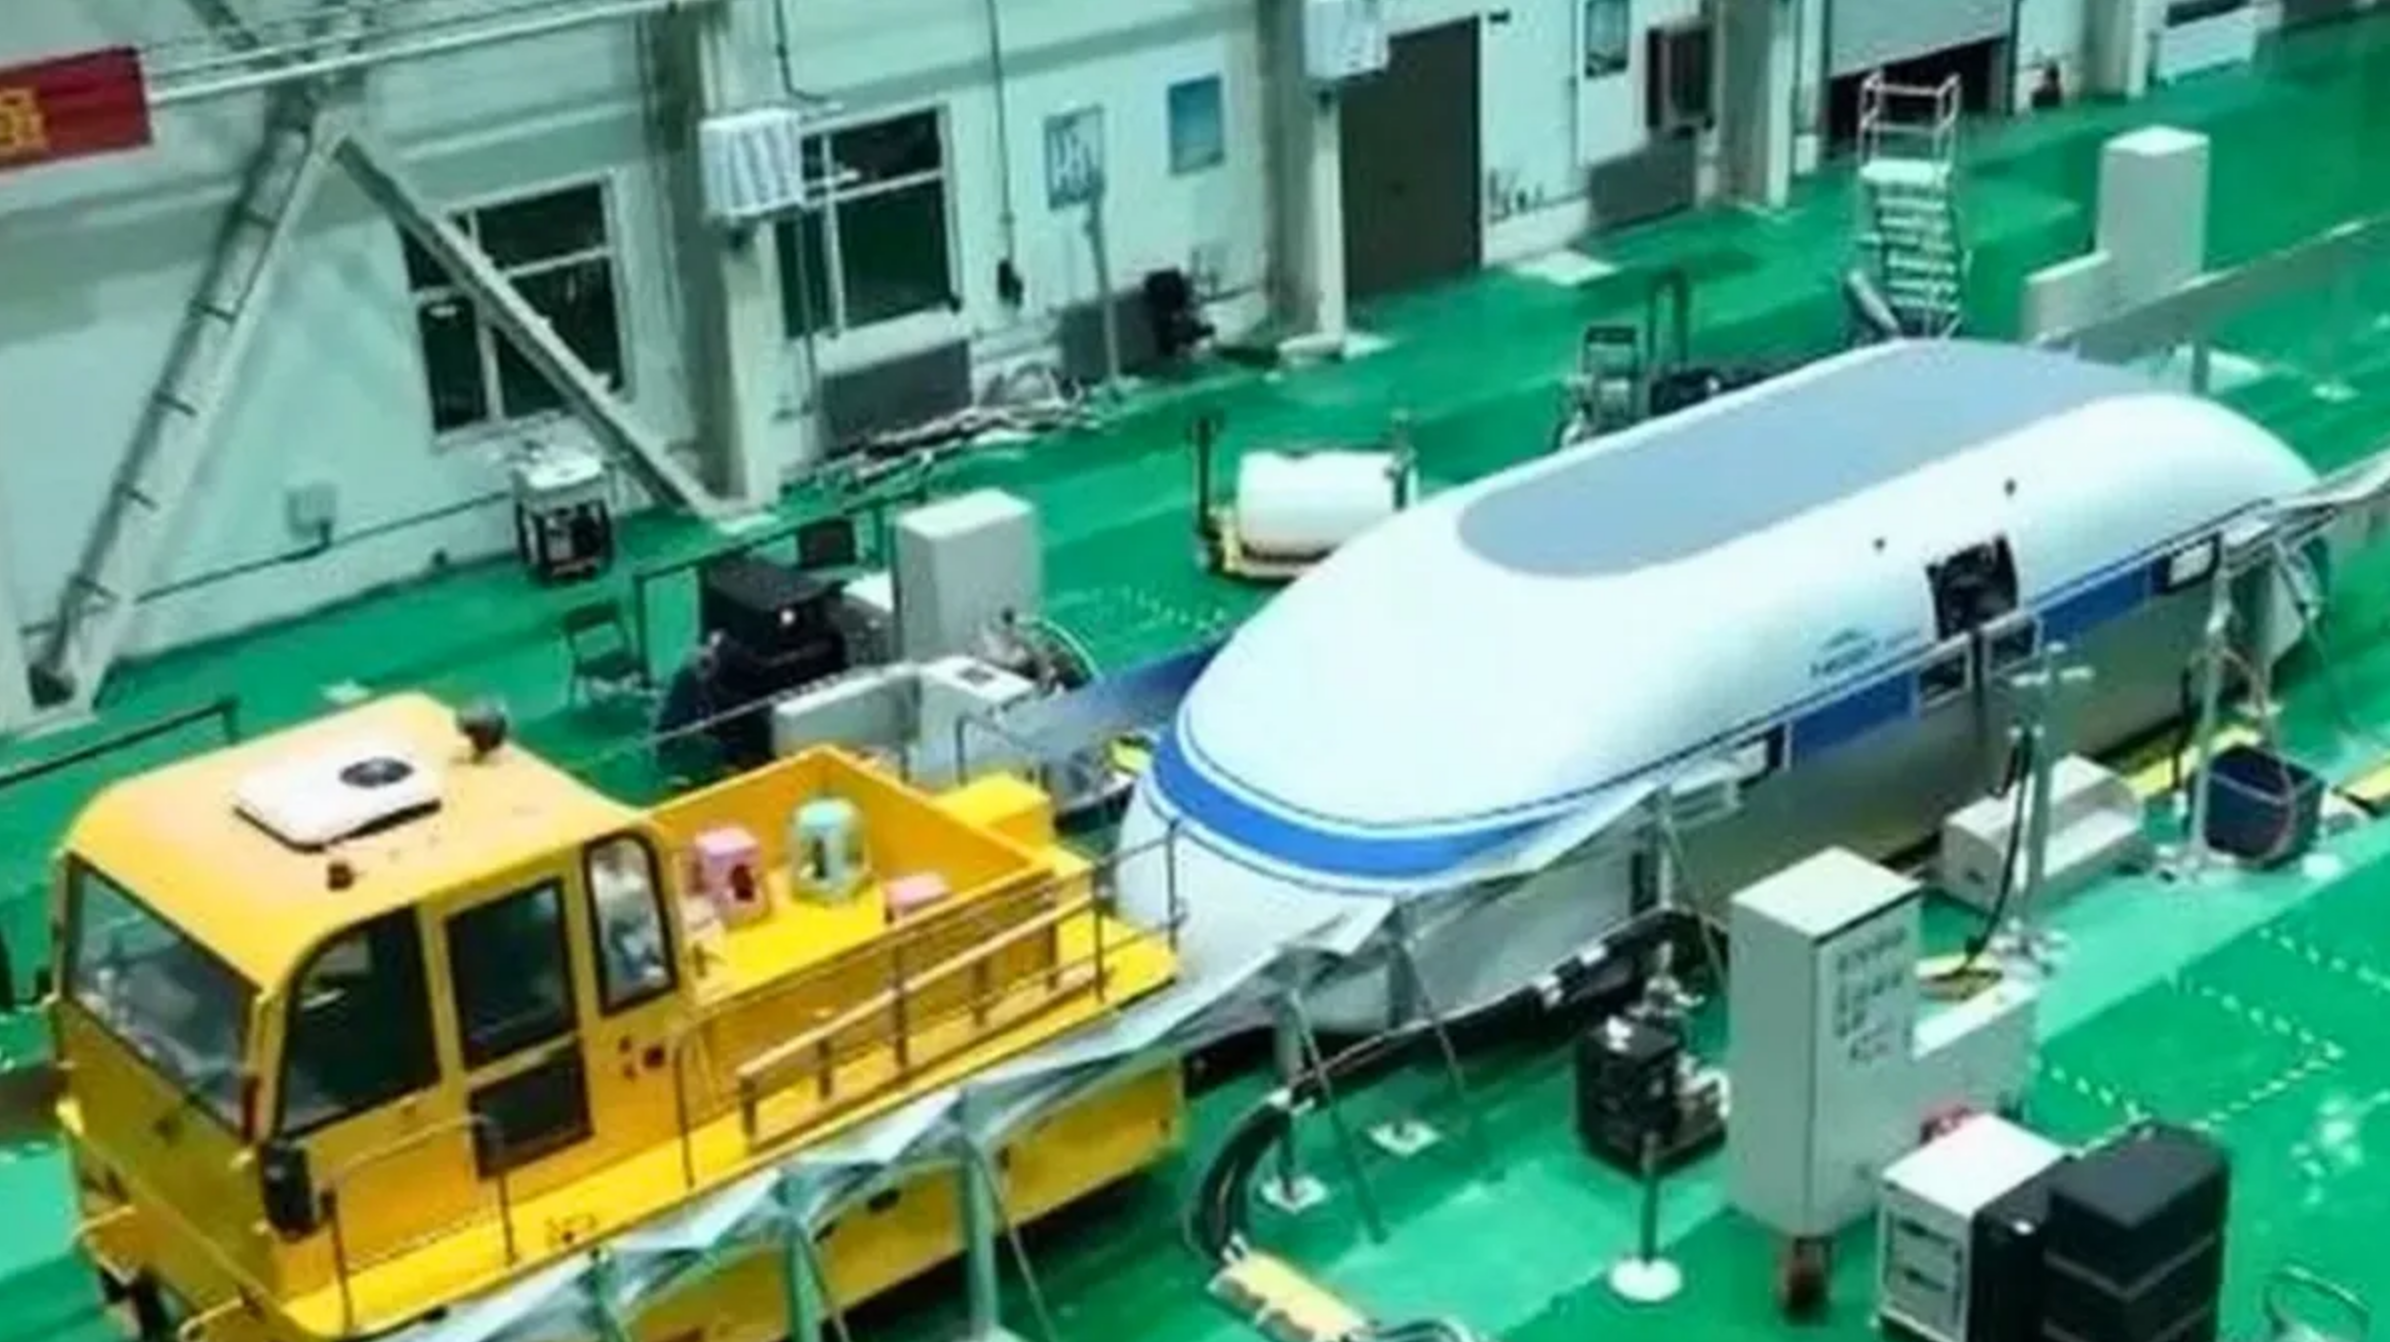 China’s High-Speed Maglev Train Breaks Records on its Way to 1,000km/h, Faster than a Plane